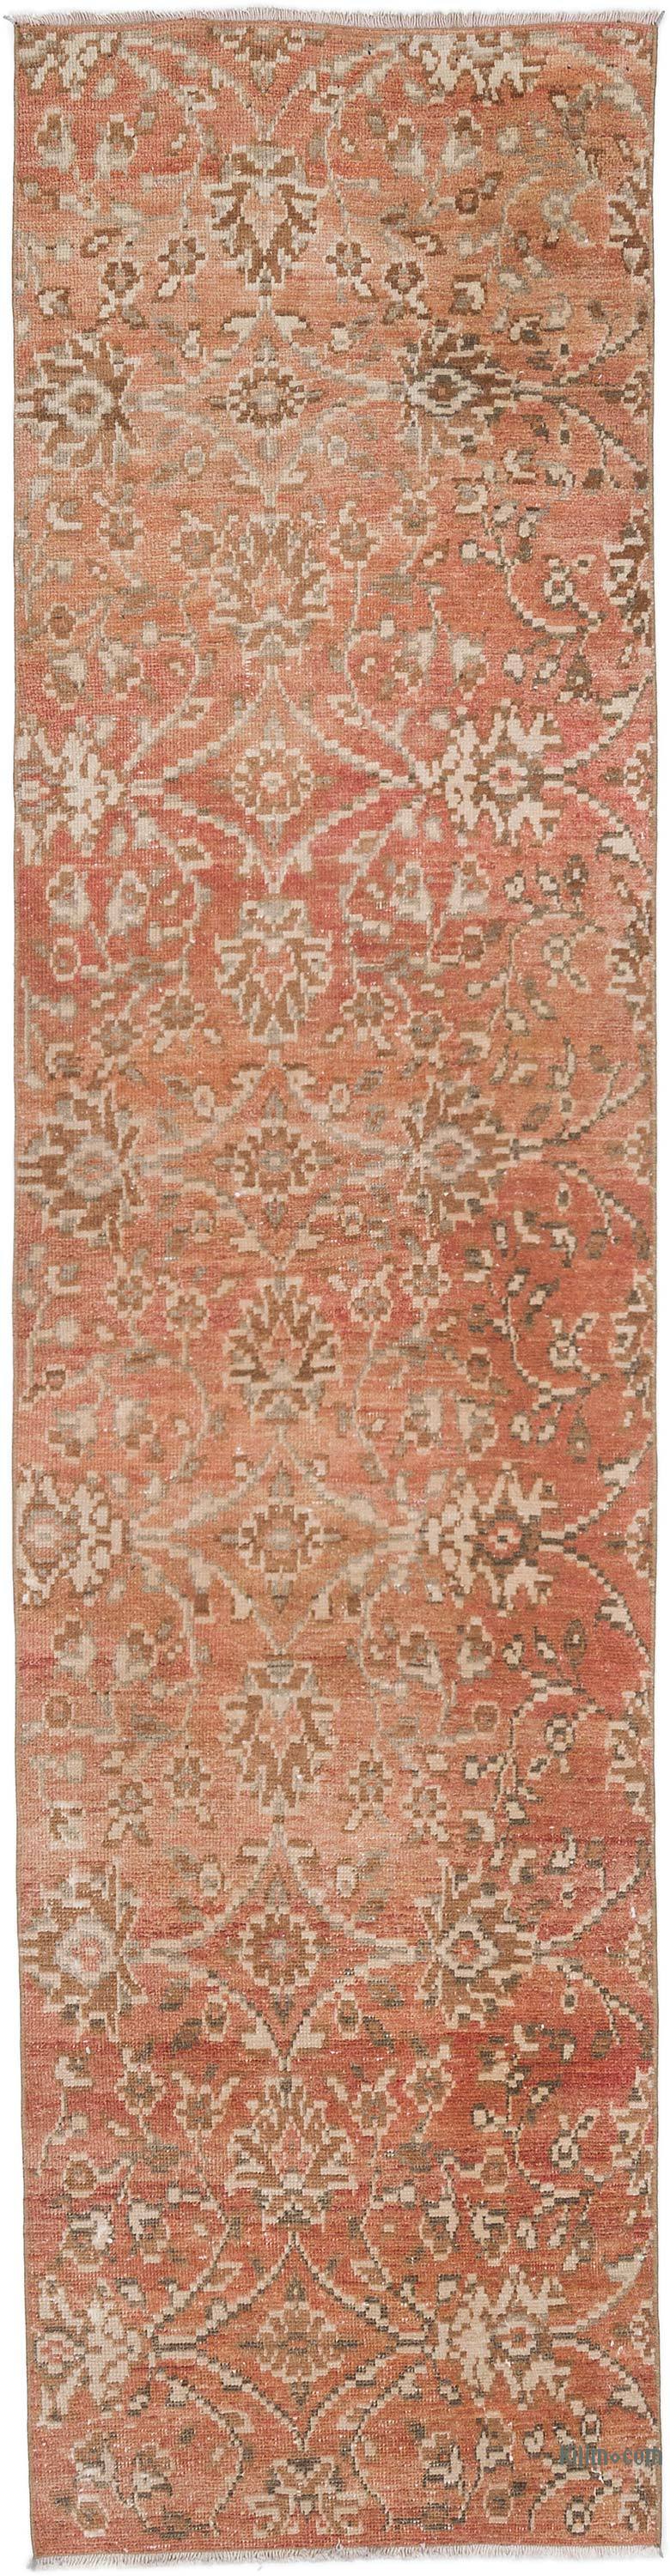 Vintage Turkish Hand-Knotted Runner - 2' 5" x 9' 5" (29 in. x 113 in.) - K0056454